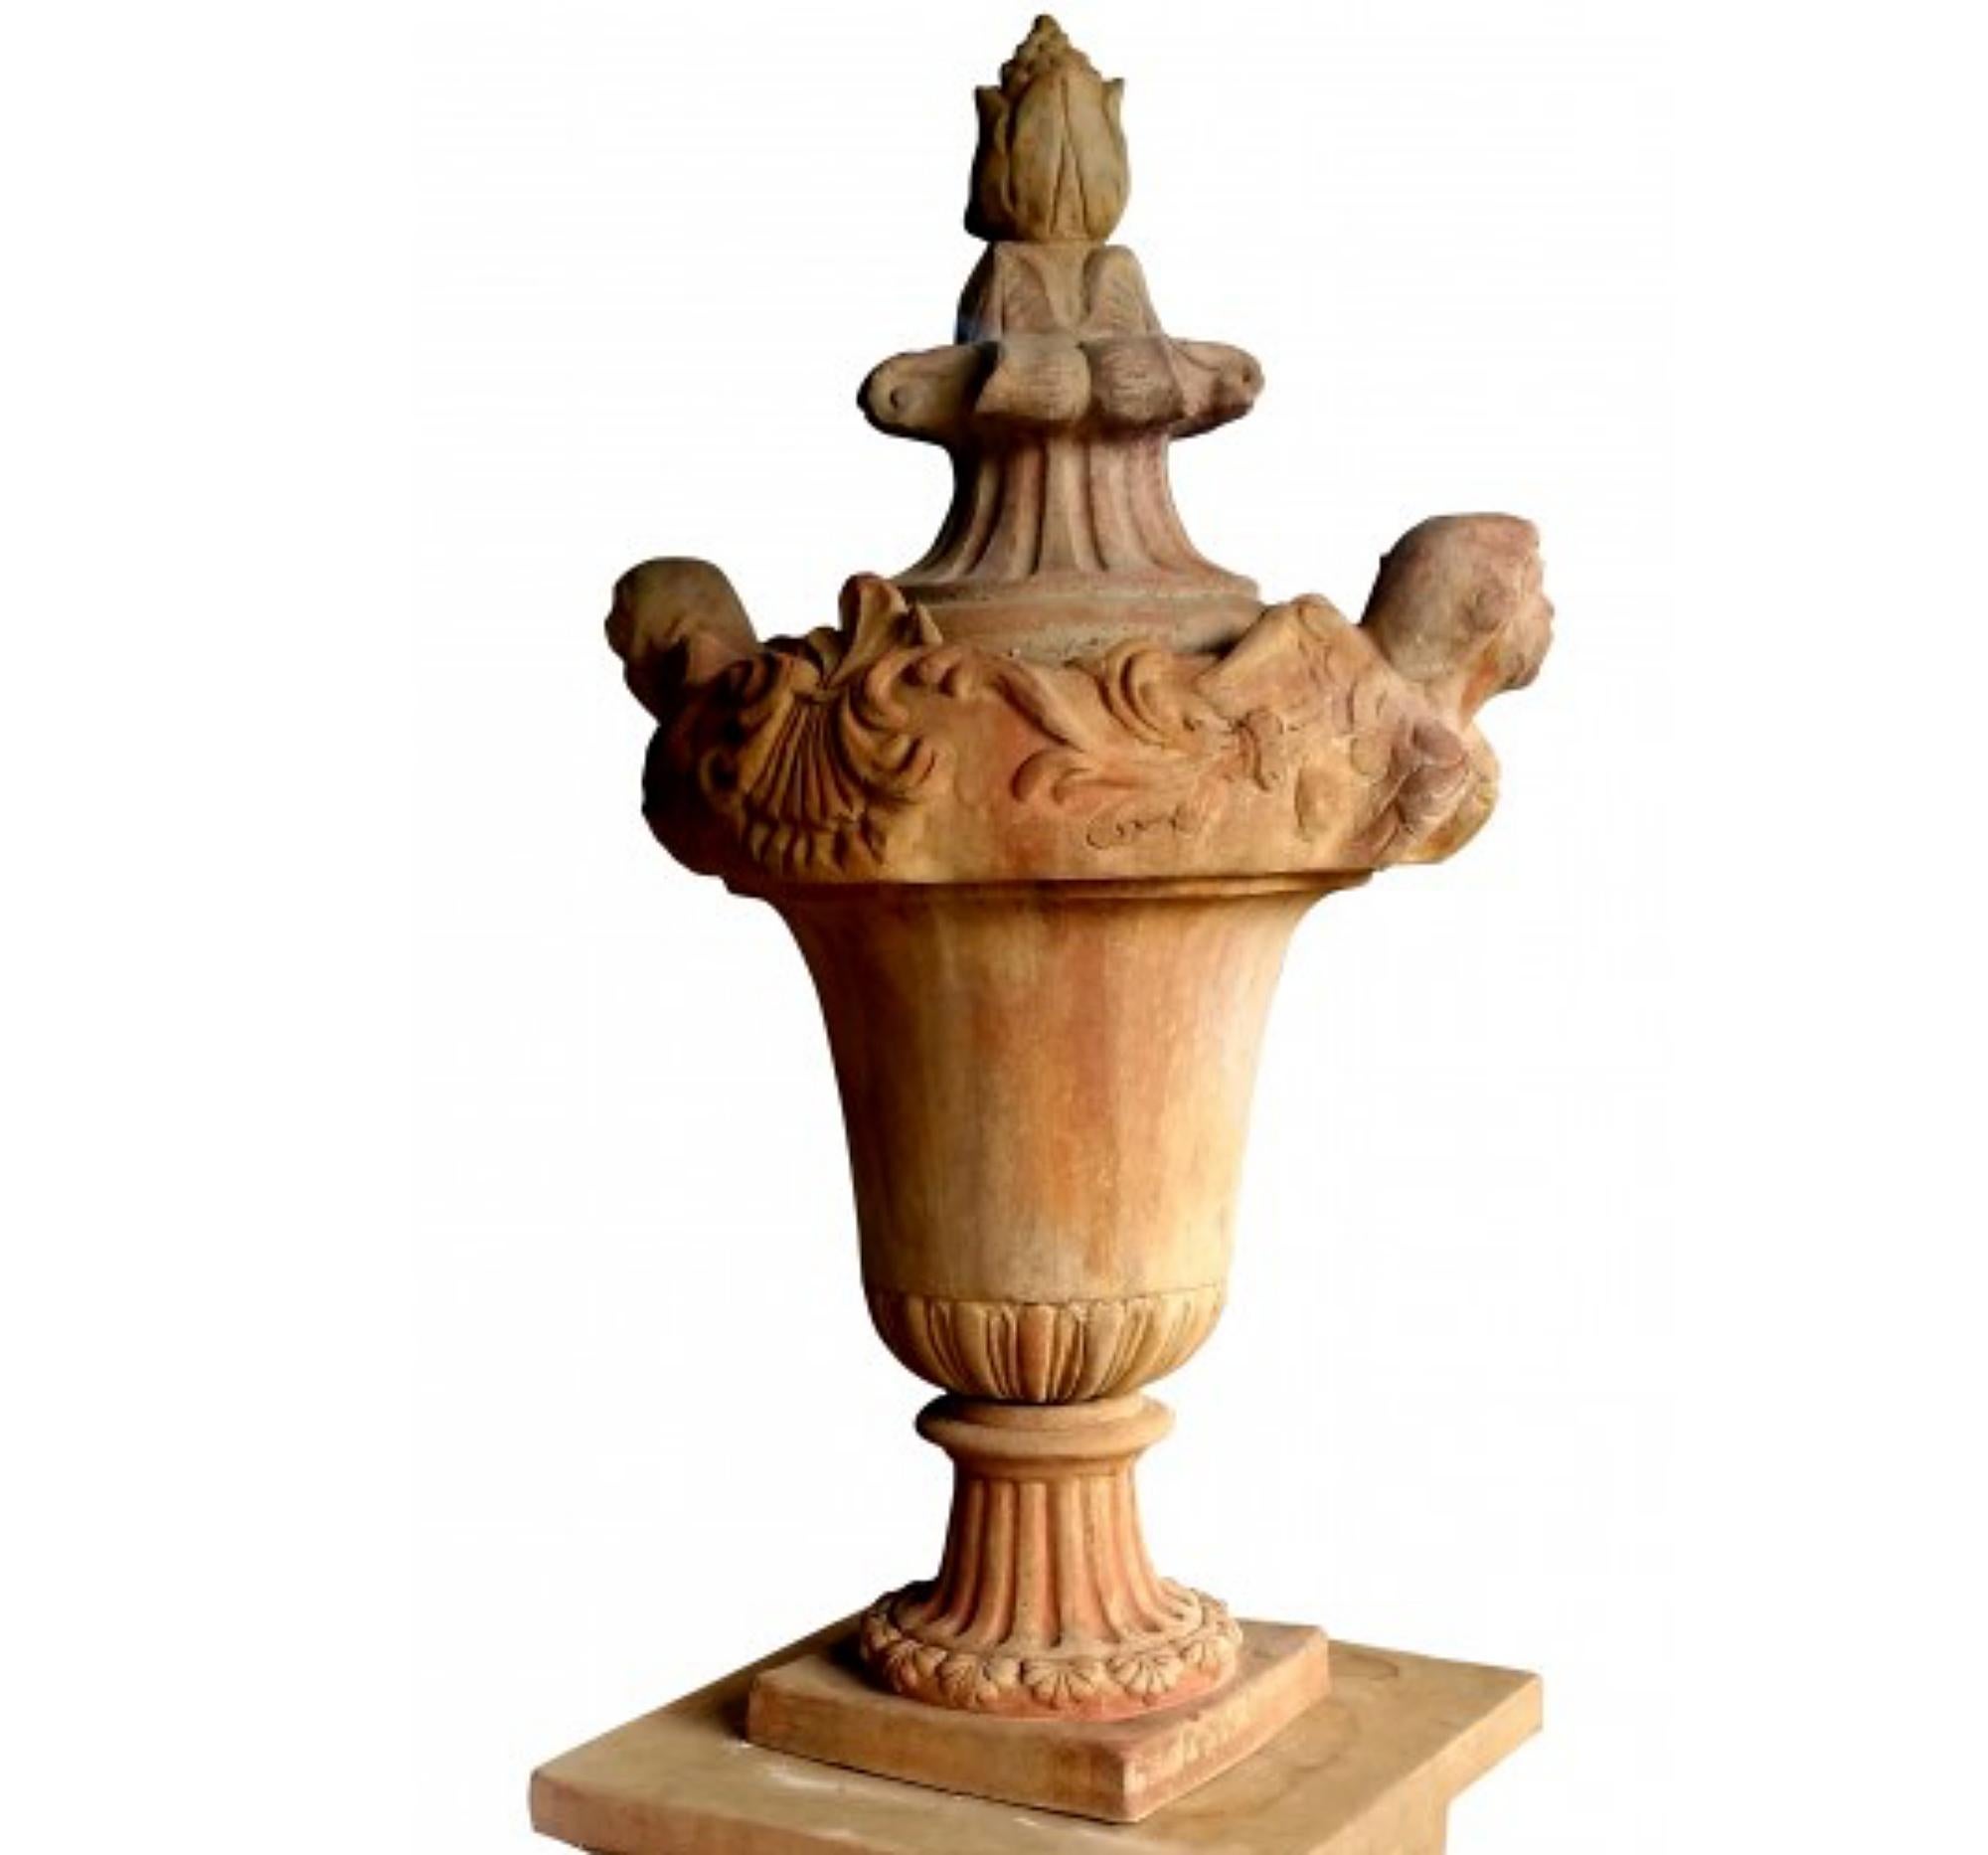 Italian Gate Vase with Two Front Putti, Tuscan Renaissance, Early 20th Century For Sale